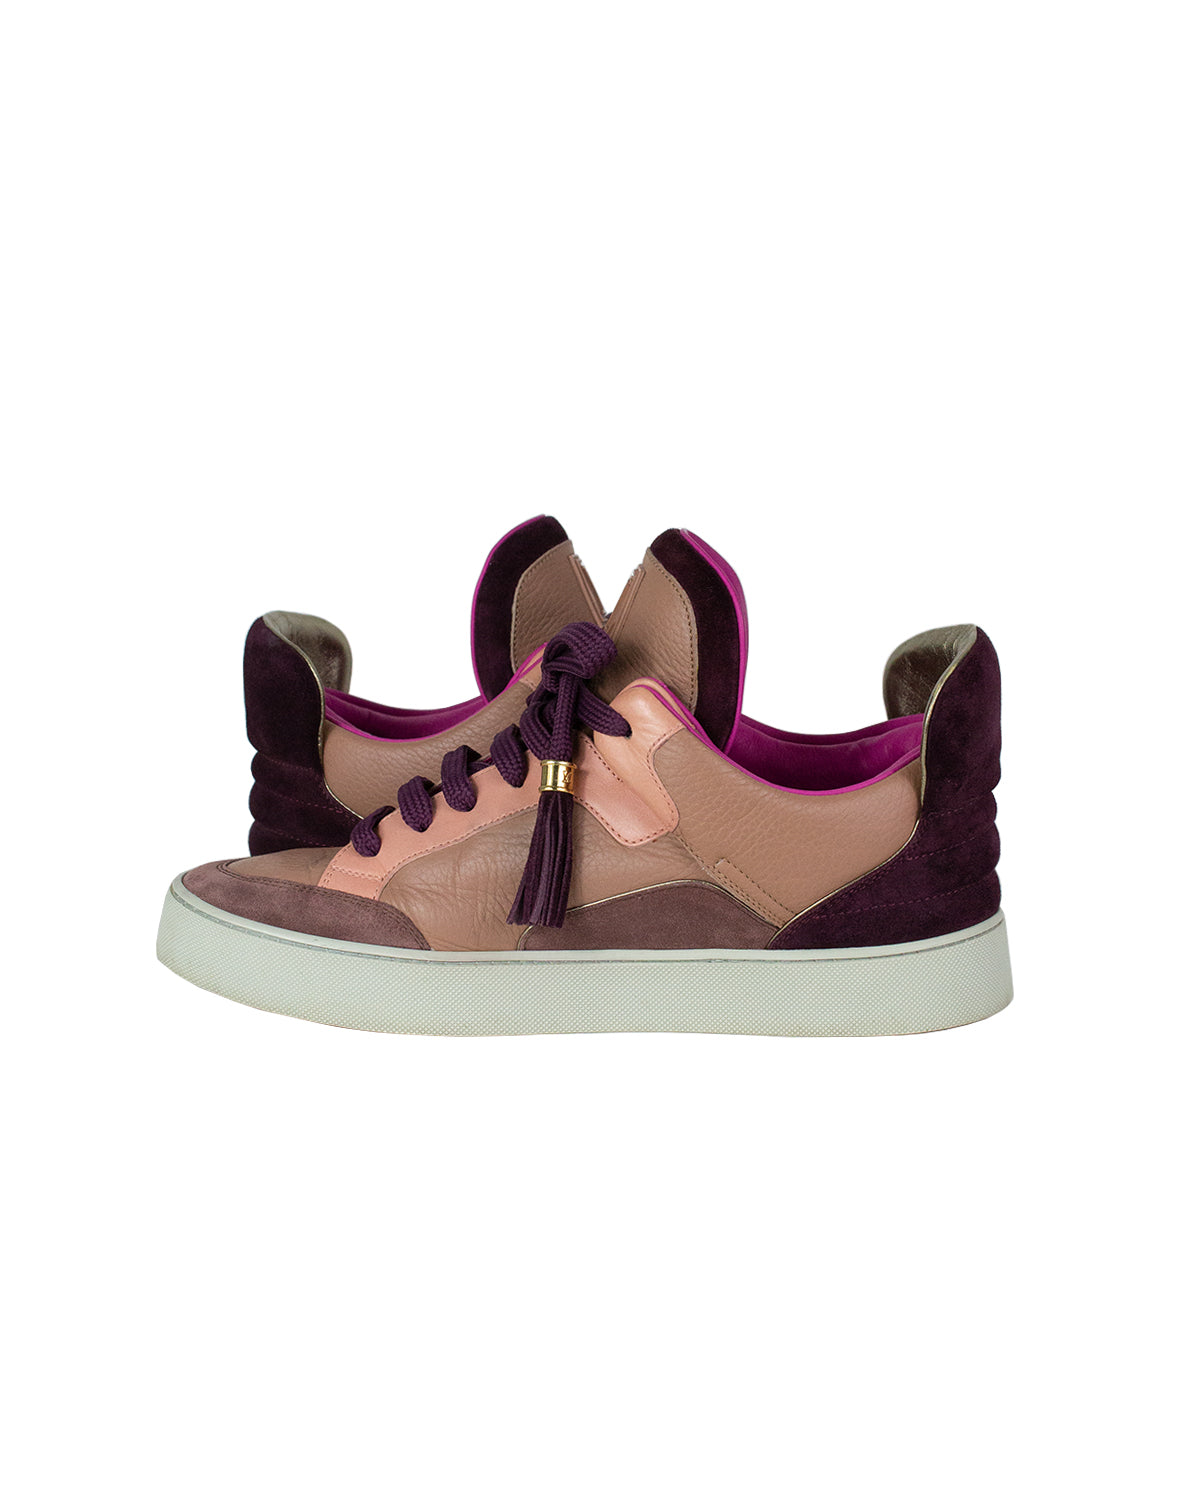 Louis Vuitton x Kanye West Don 'Patchwork' Sneakers 8 UK | 9